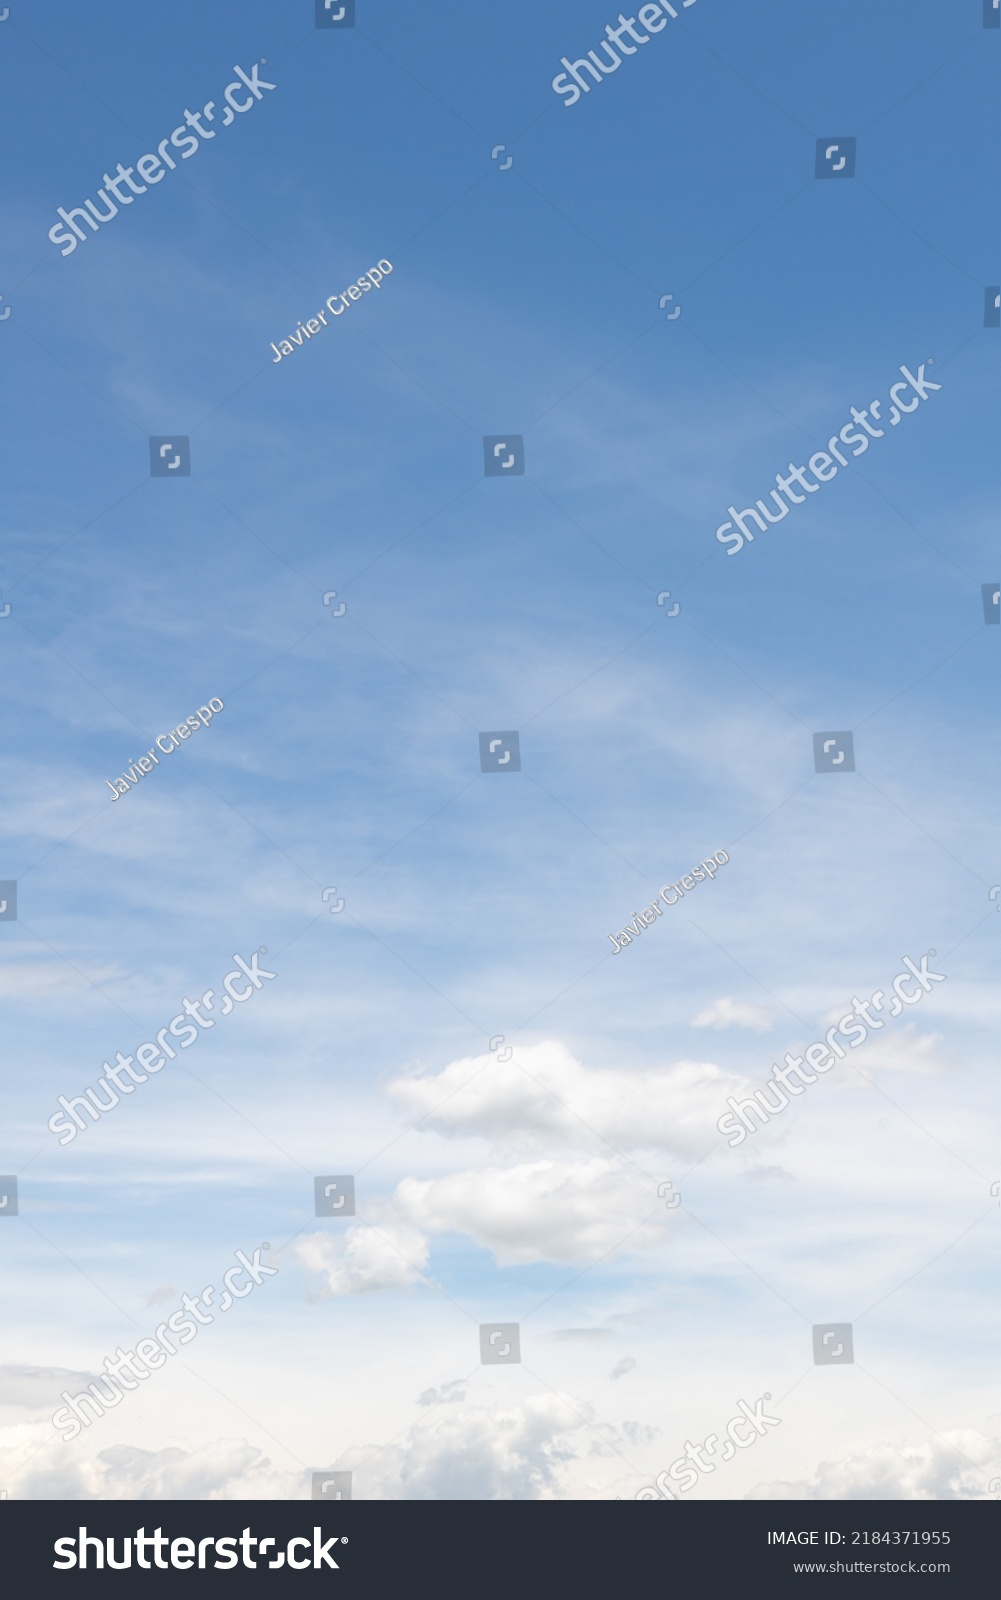 blue skies with clouds for backgrounds #2184371955